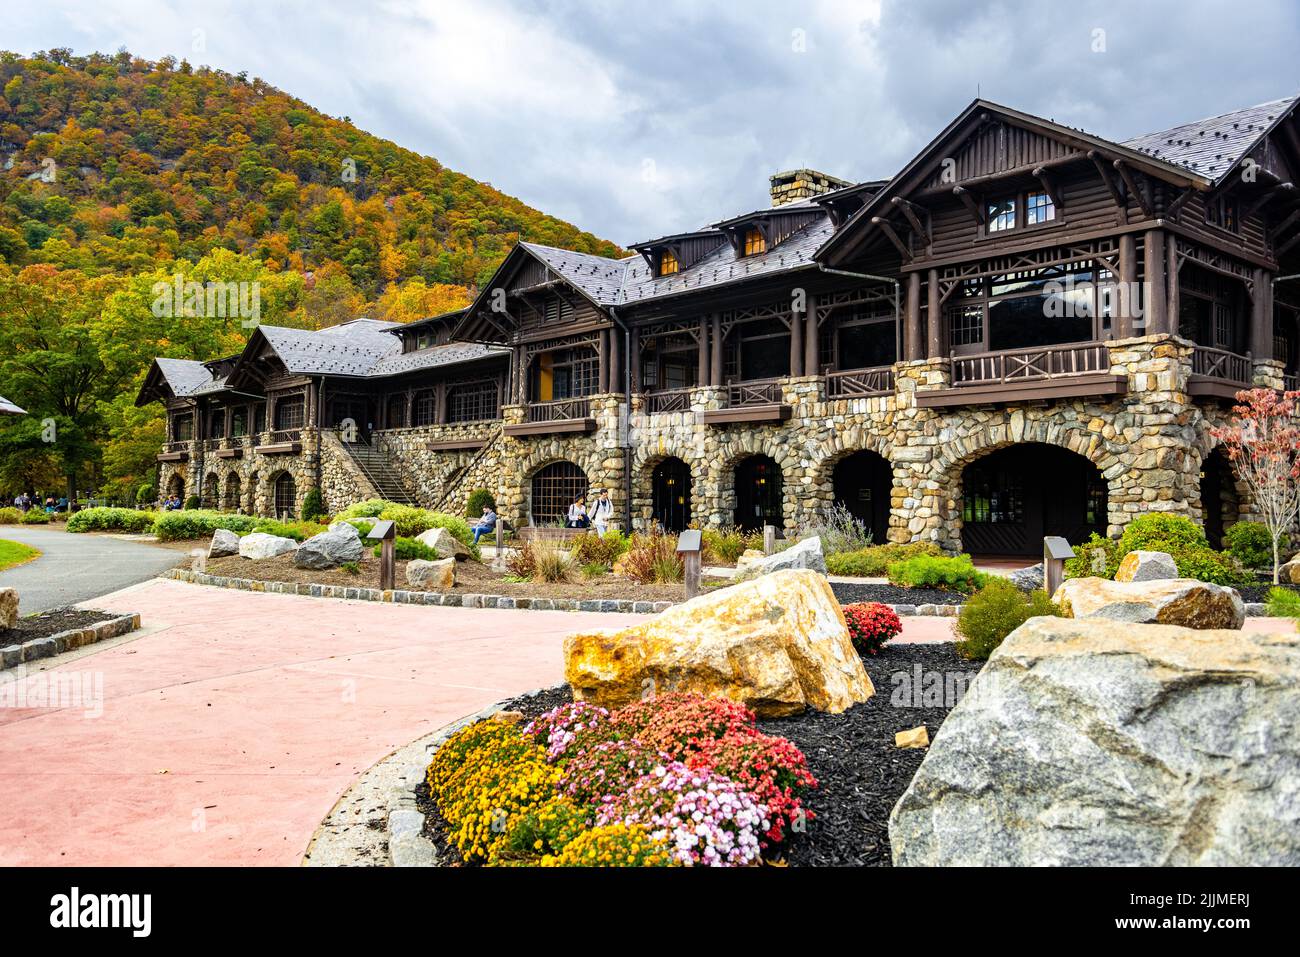 A closeup of a Mountain lodge on a fall day Stock Photo